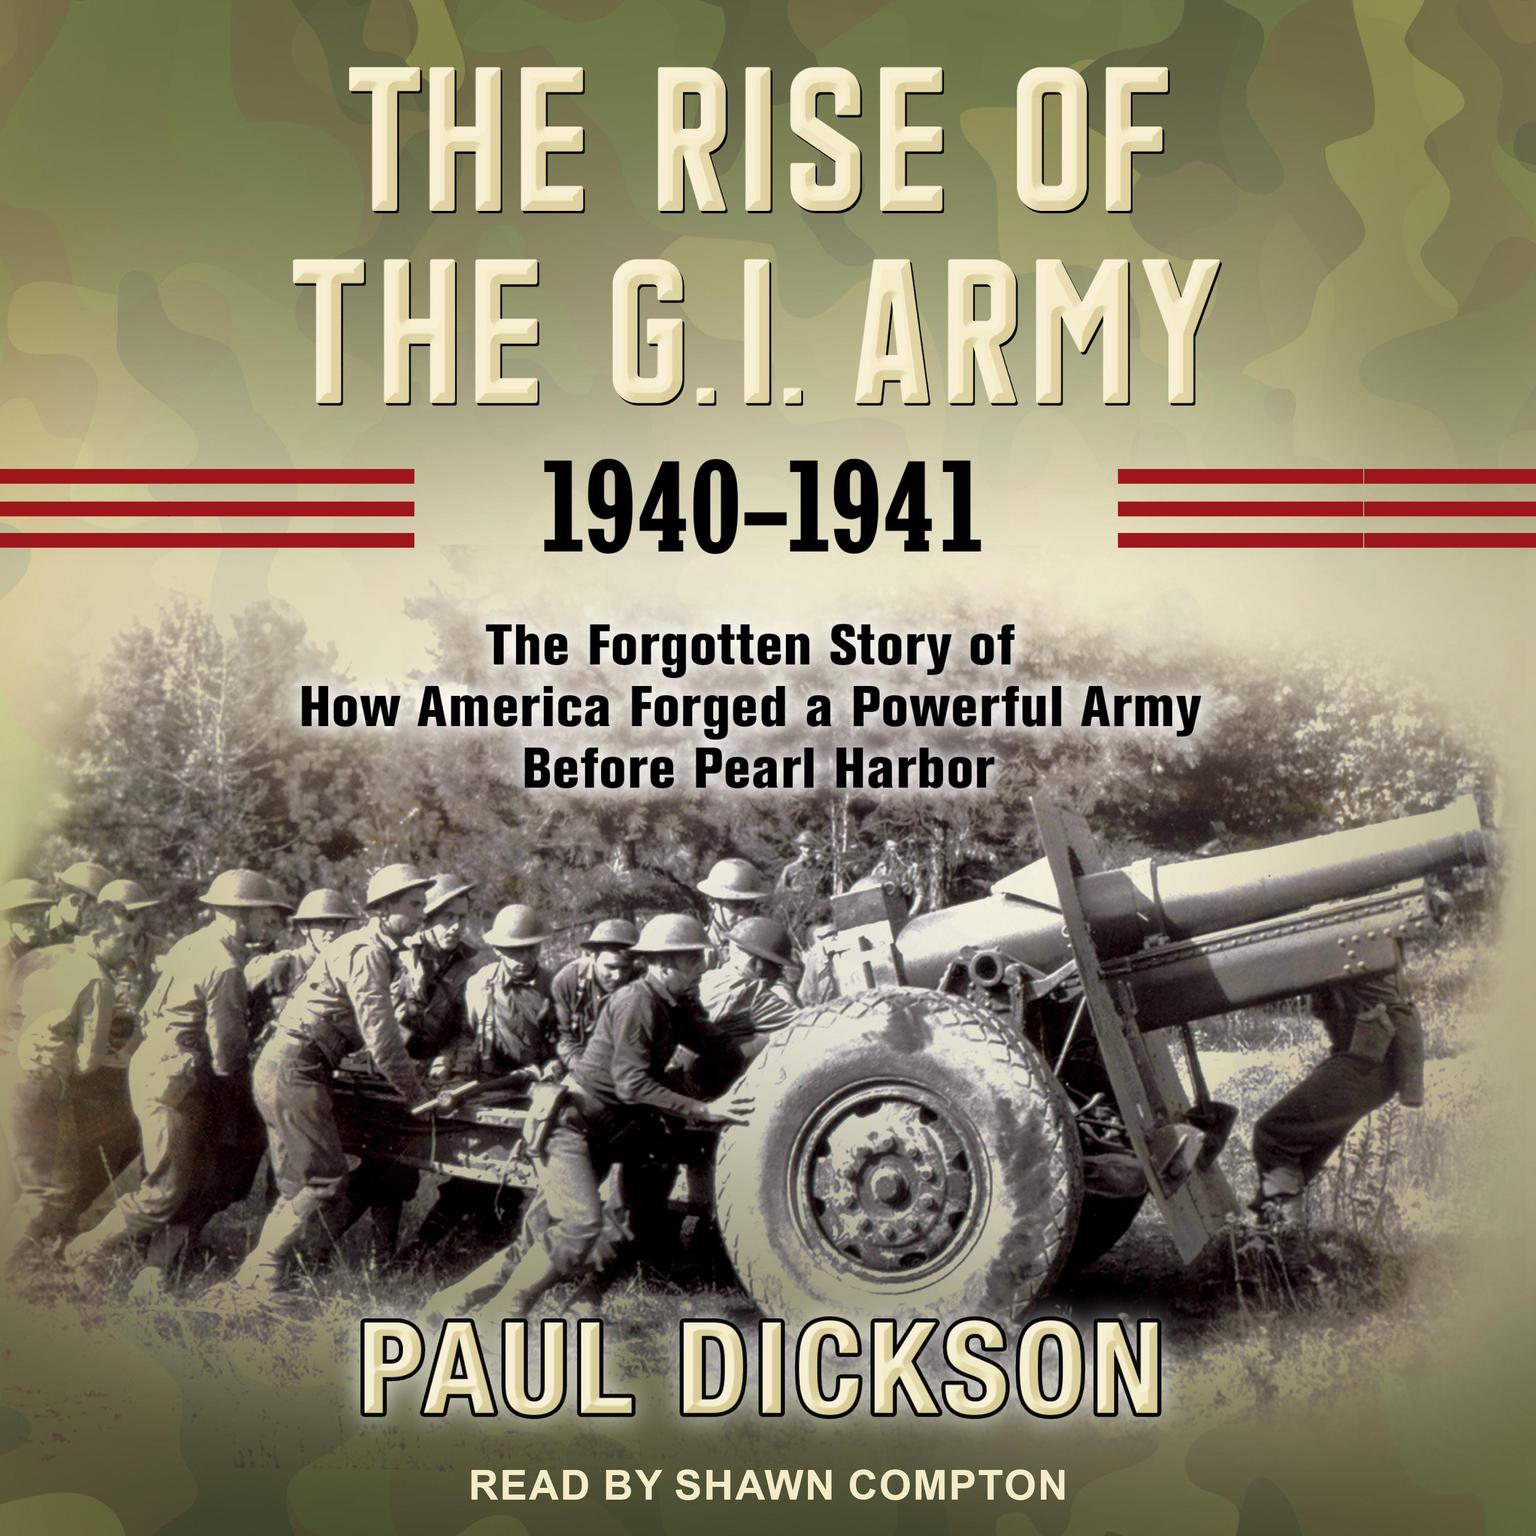 The Rise of the G.I. Army, 1940-1941: The Forgotten Story of How America Forged a Powerful Army Before Pearl Harbor Audiobook, by Paul Dickson